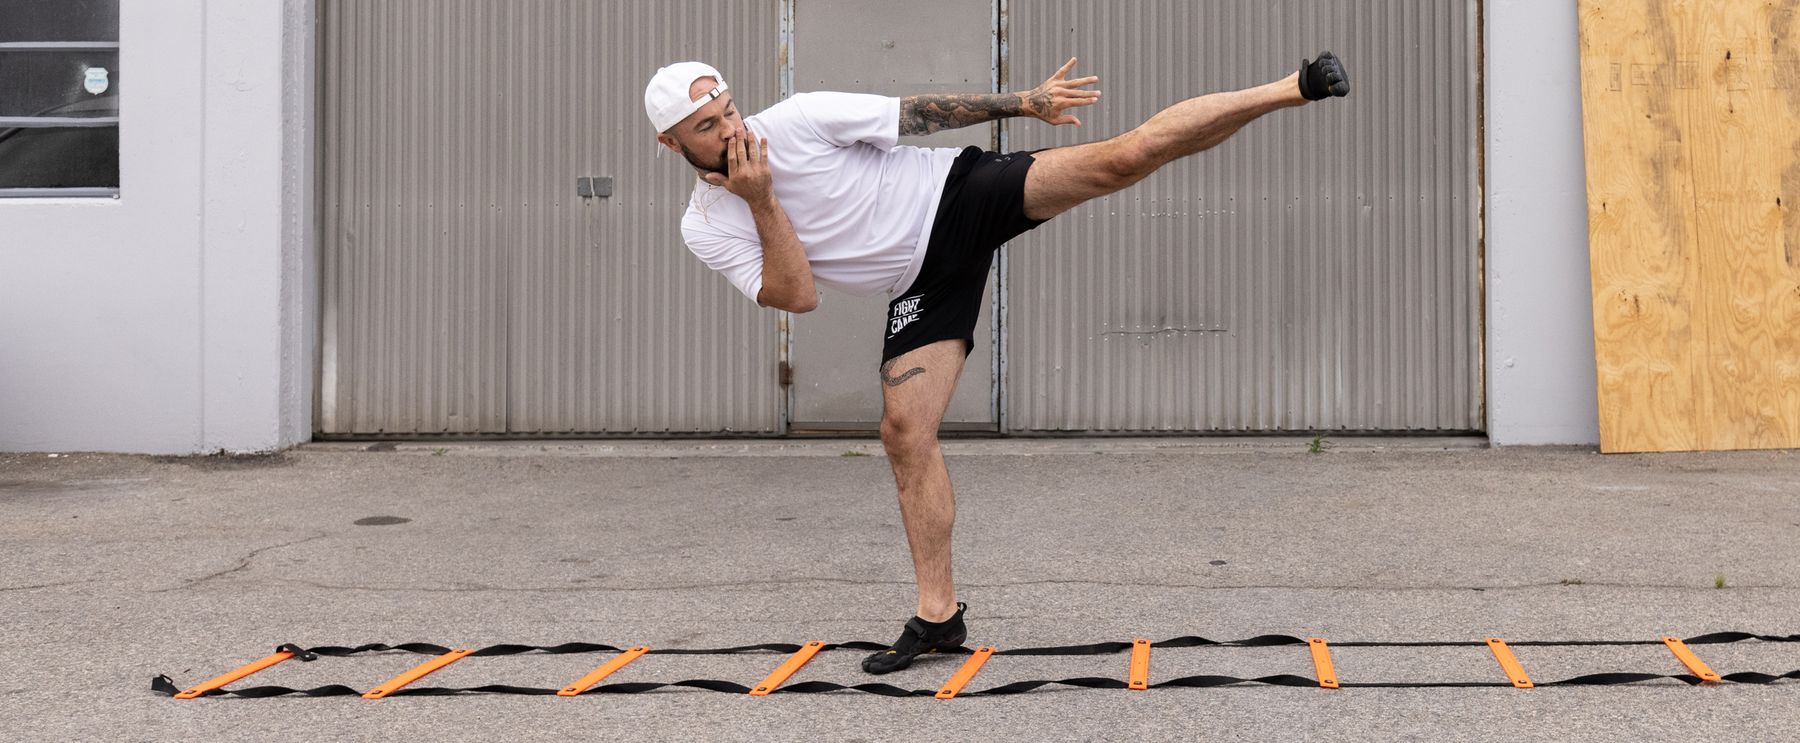 5 Agility Ladder Drills For Boxing and Kickboxing